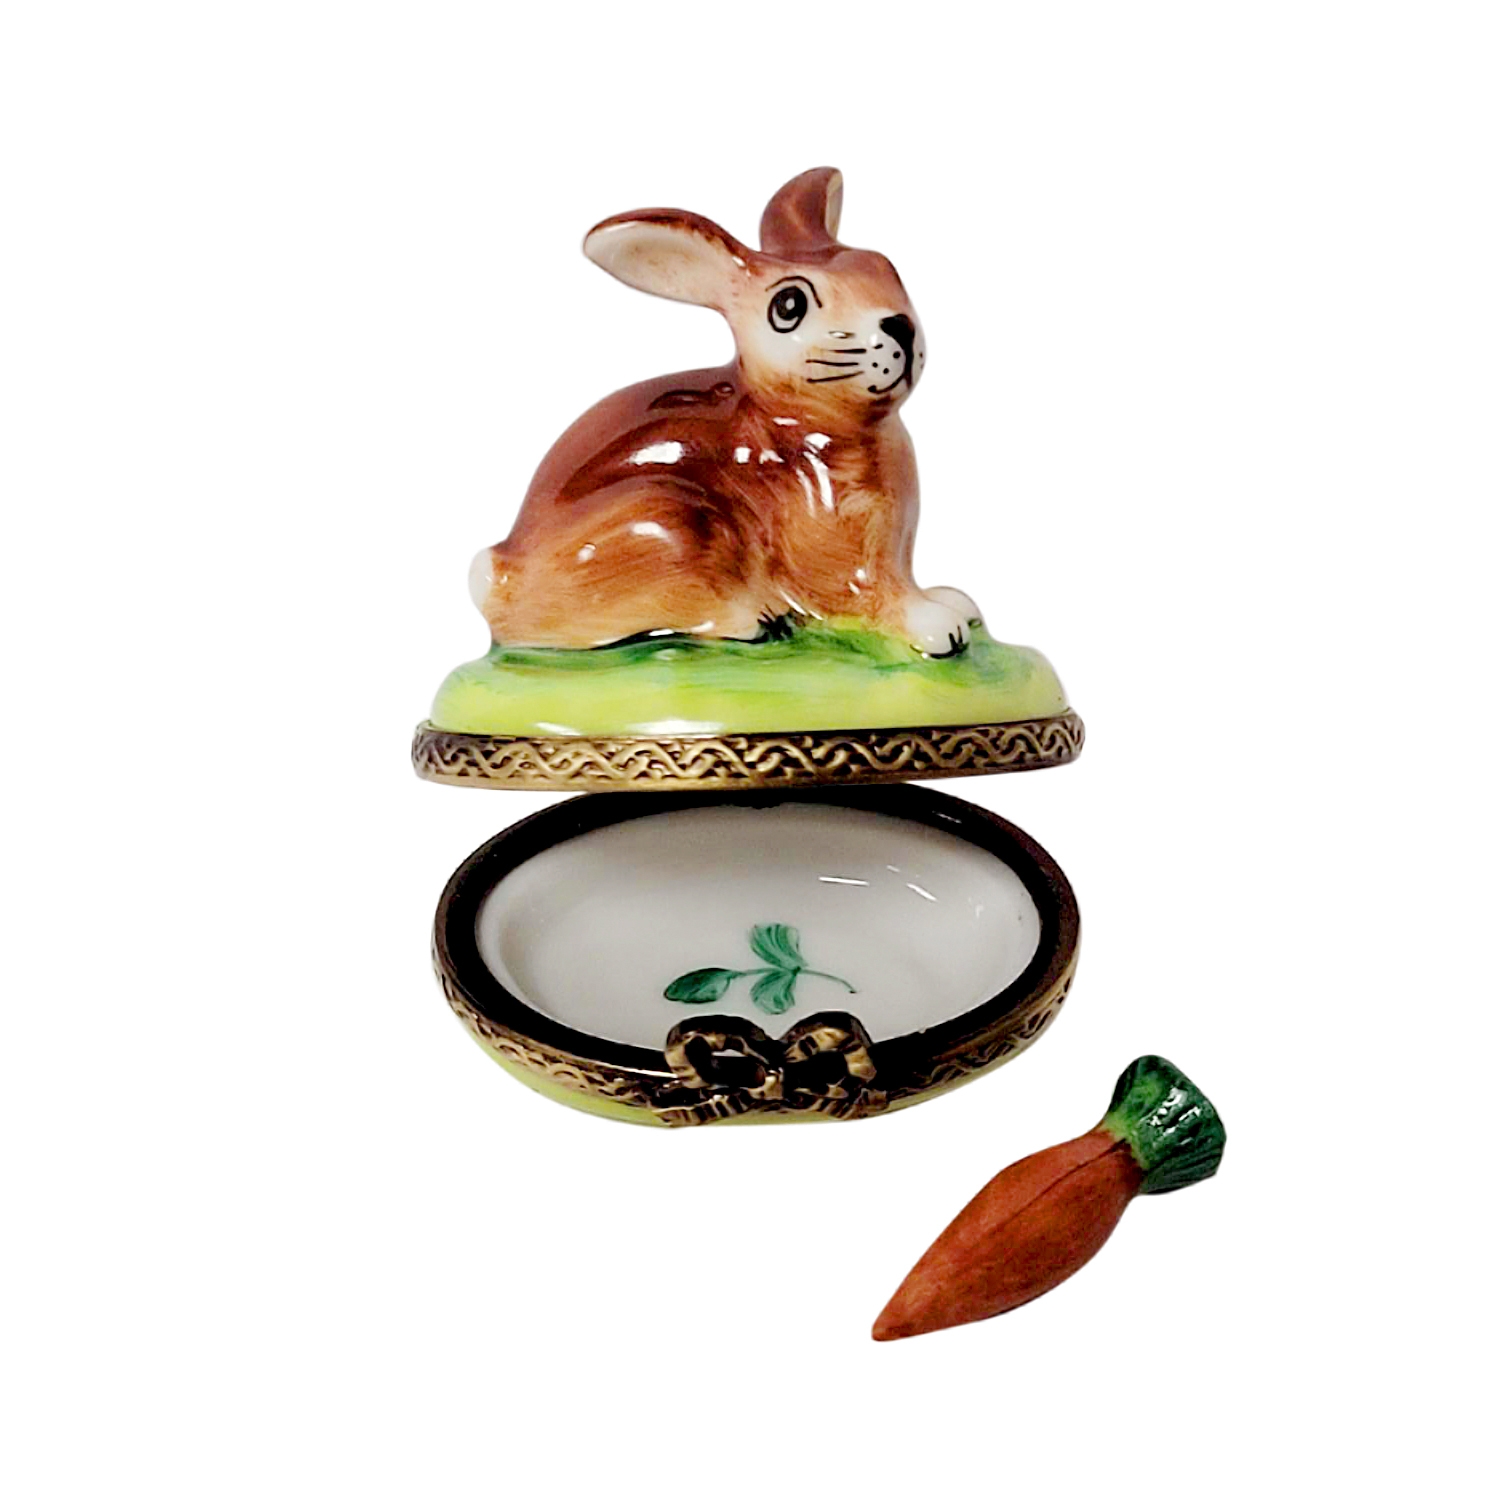 SMALL BUNNY WITH REMOVABLE CARROT